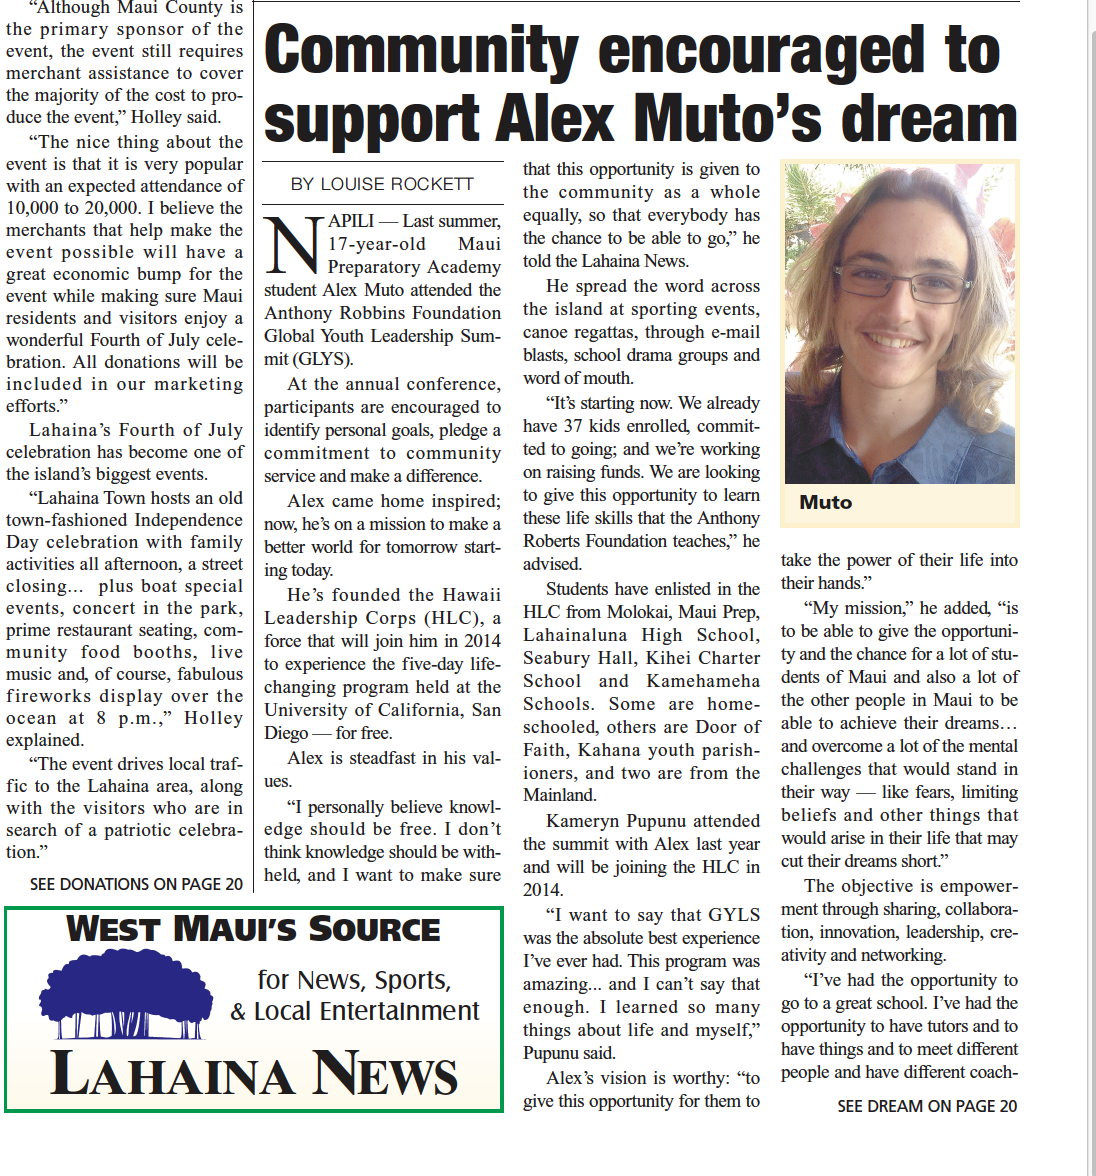 Community encouraged to support Alex Muto’s dream